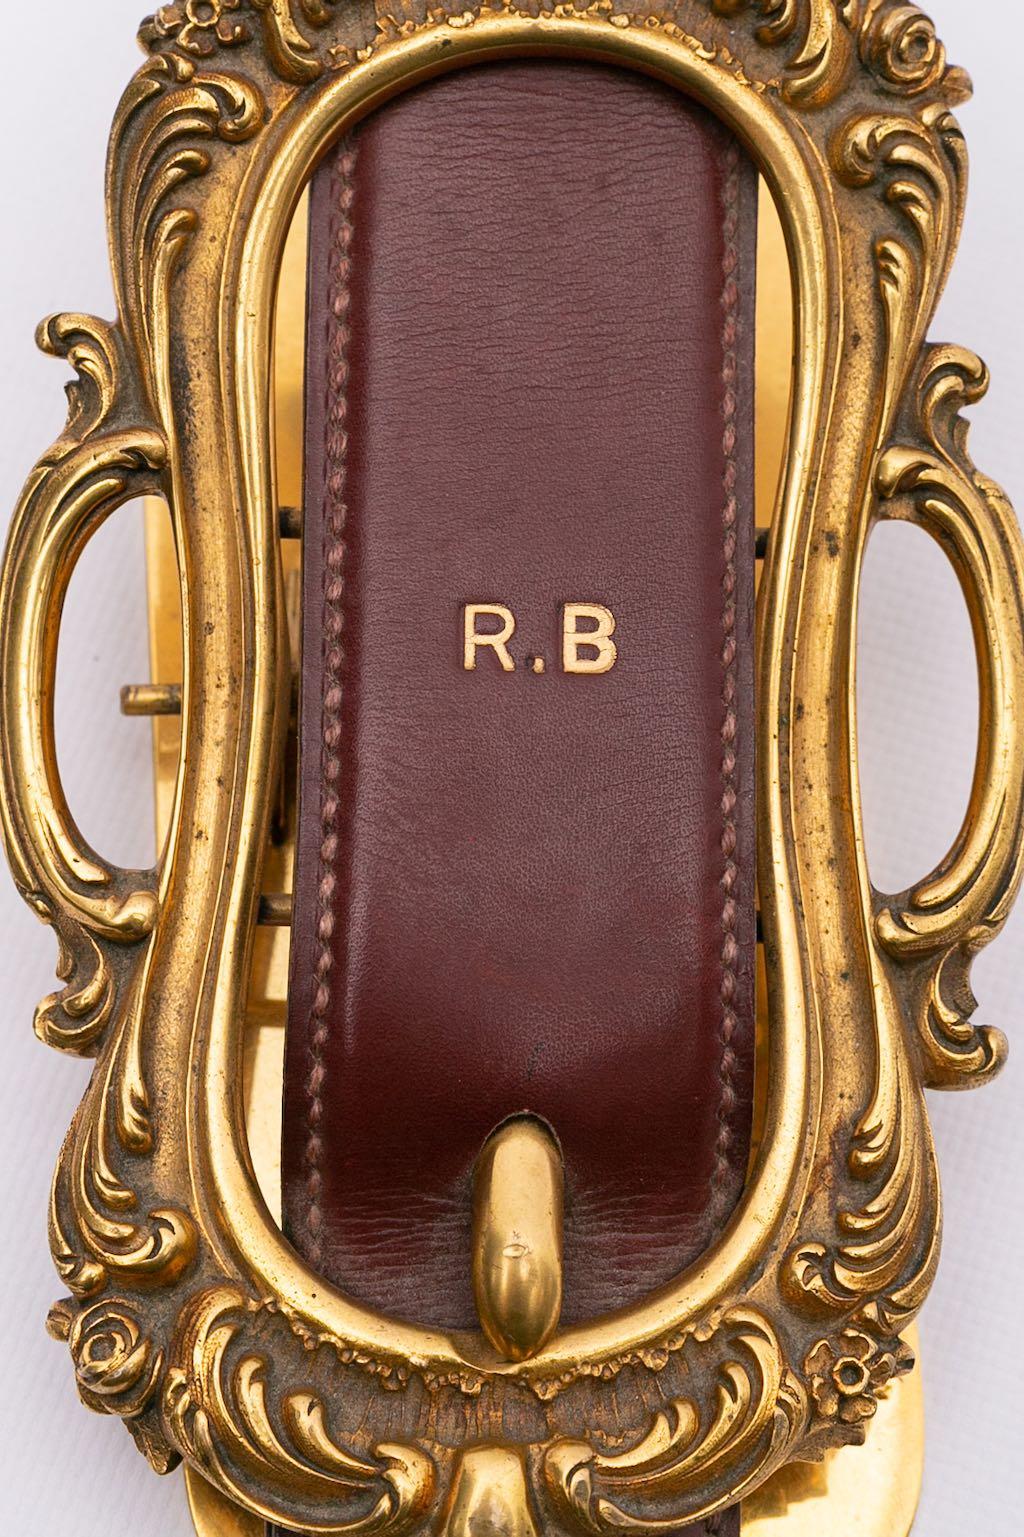 Hermes -Paperweight leather and gold plate representing a belt buckle - personal item with a date and initial R.B.

Additional information: 
Dimensions: Length: 21.5 cm (8.46